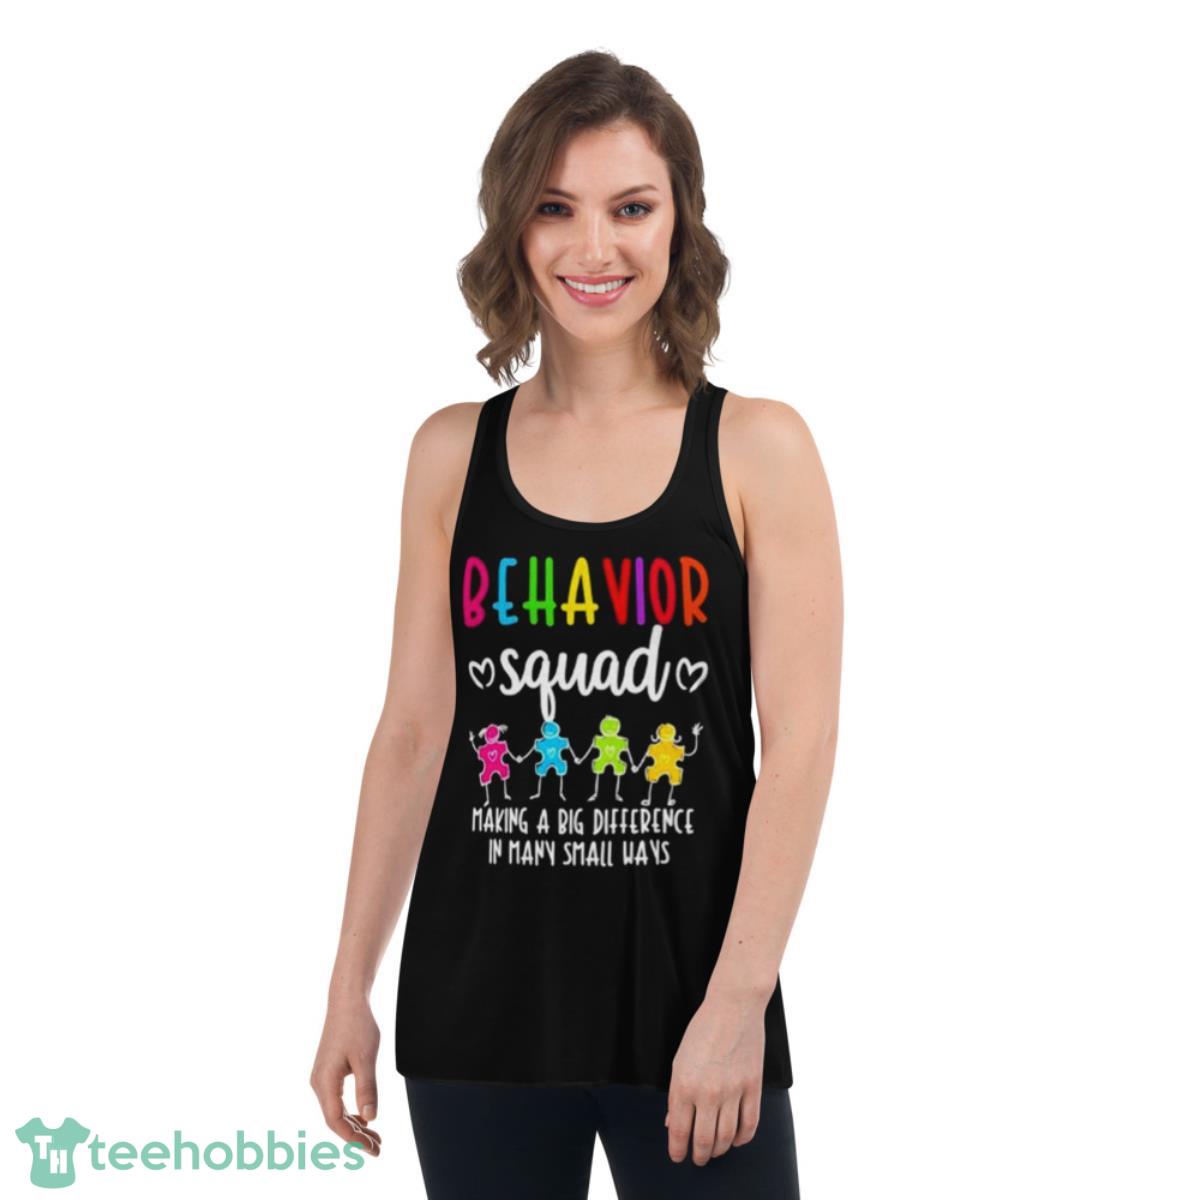 Behavior Squad Making A Big Difference In Many Small Ways Autism Shirt